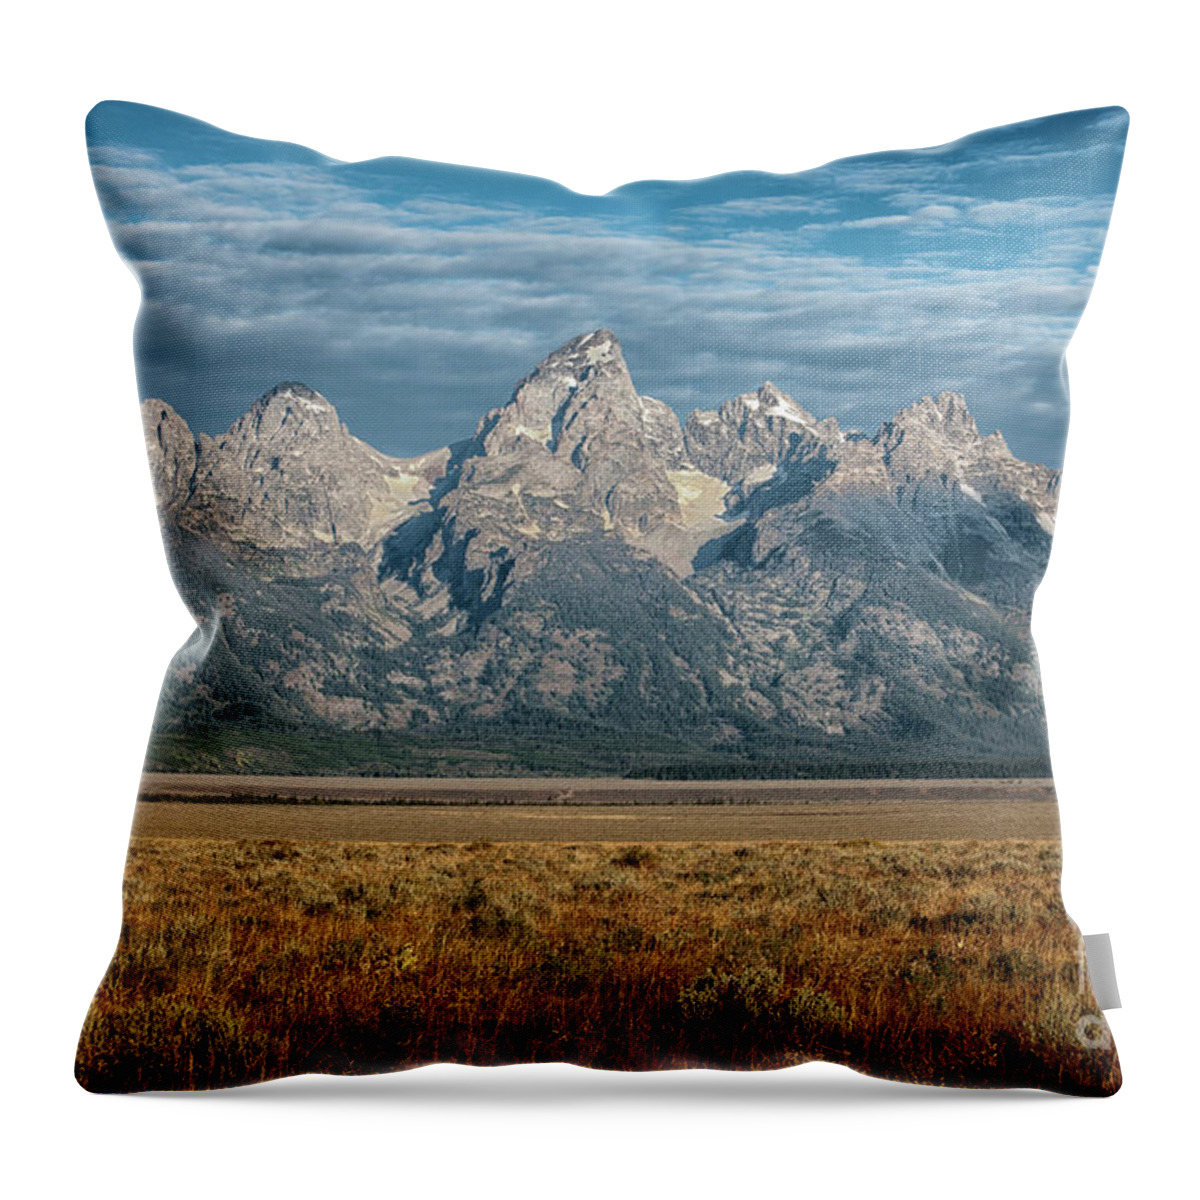 Landscape Throw Pillow featuring the photograph Morning Beauty by Sandra Bronstein